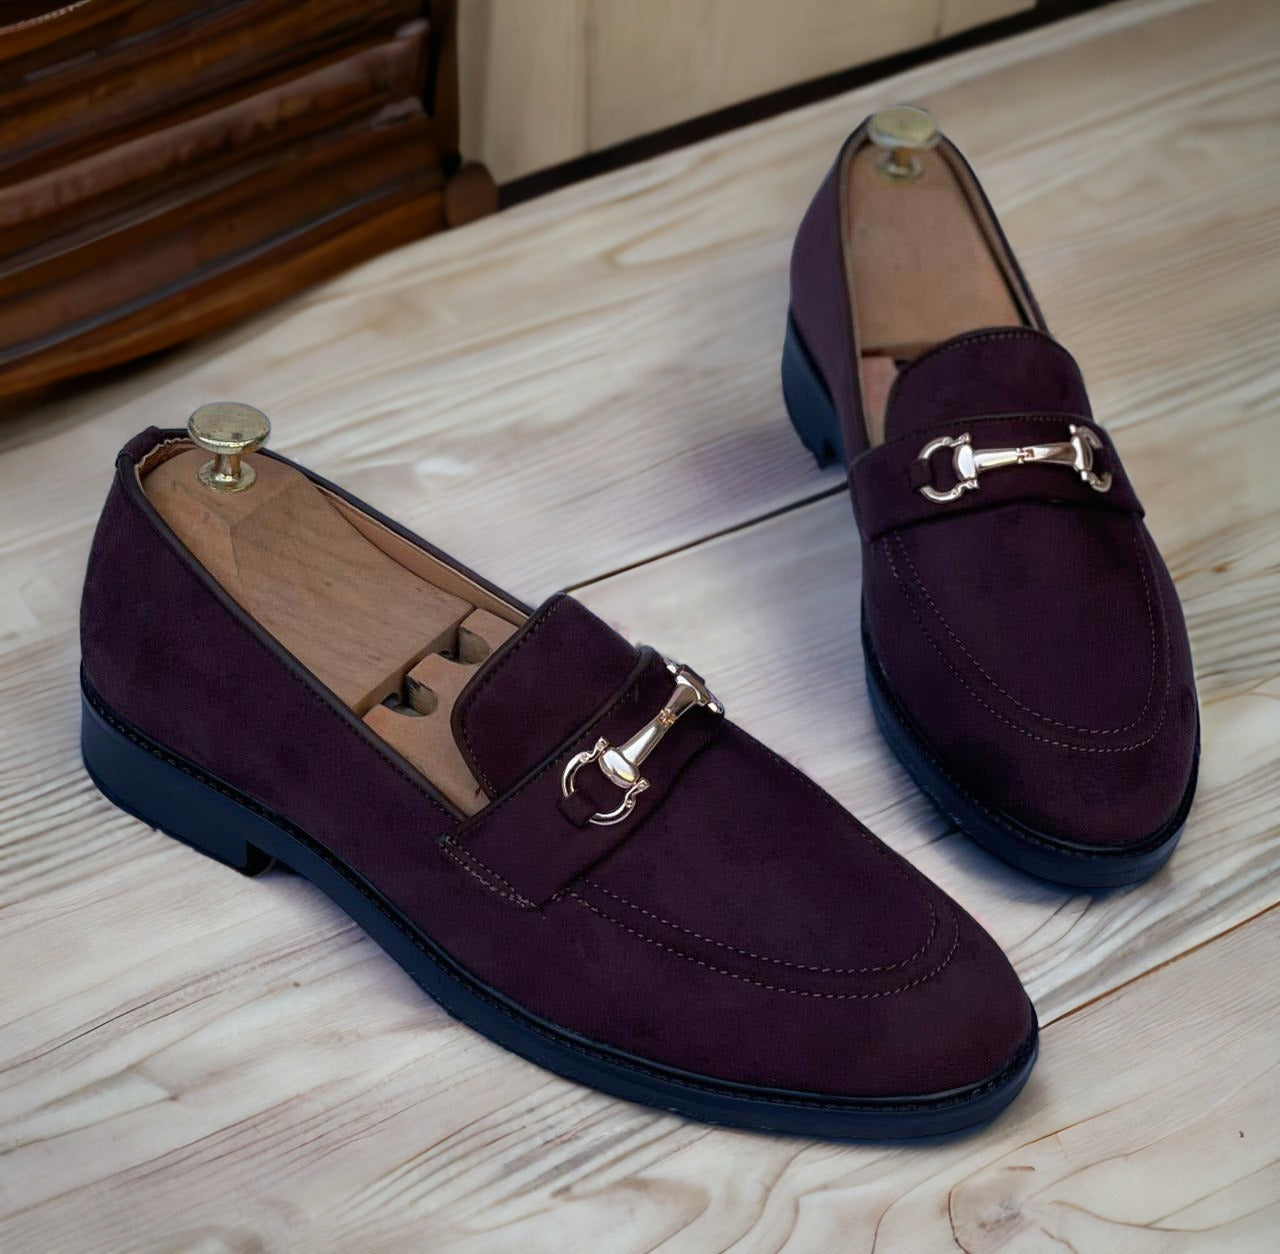 Jack Marc The Versatile Choice Designer Driving Loafers for Every Occasion